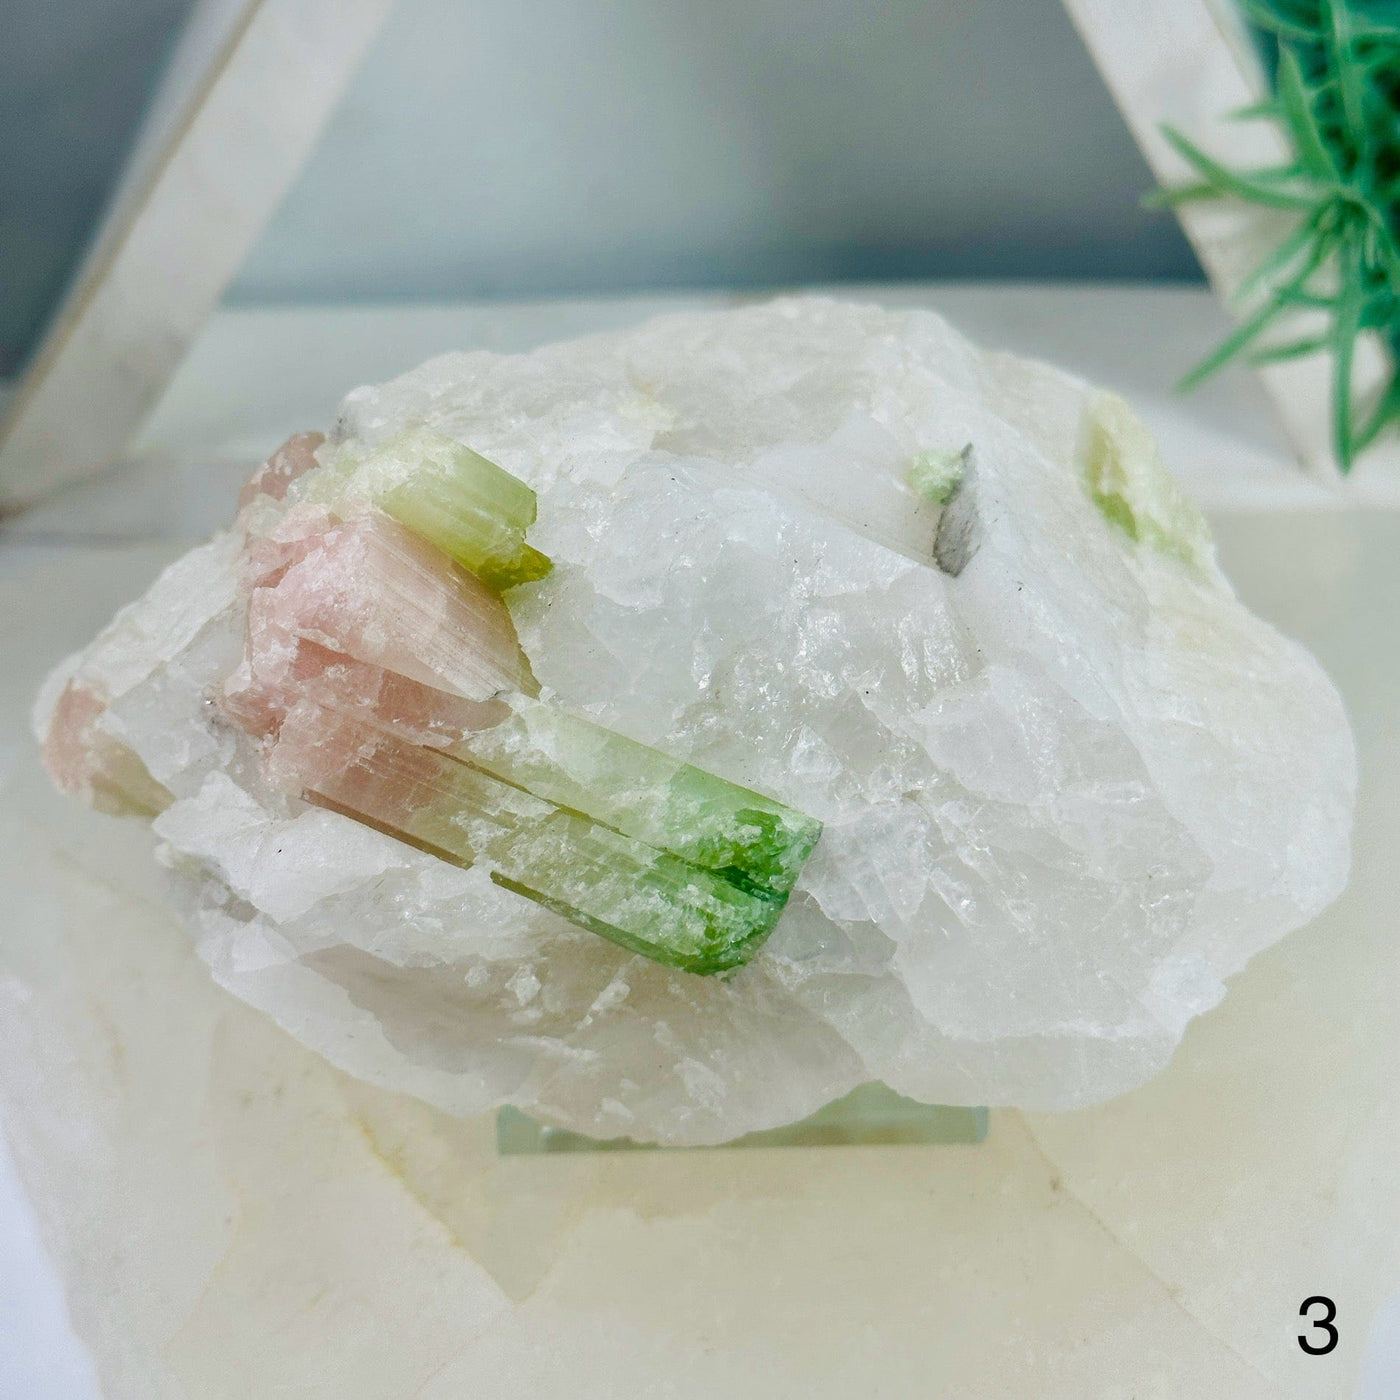 Watermelon Tourmaline Crystals in Matrix - You Choose variant 3 labeled